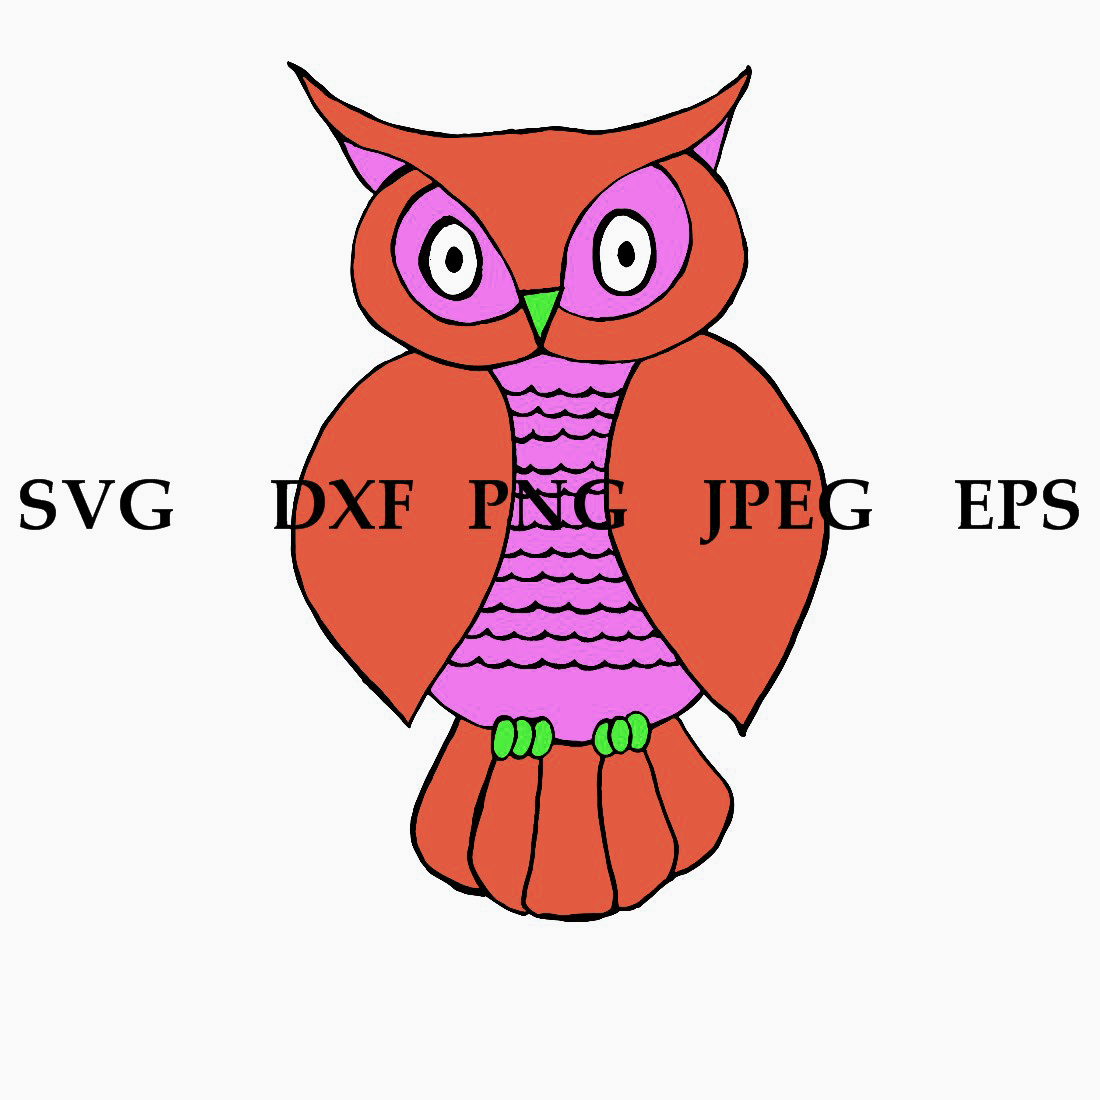 Owl DXF SVG Stickers Rustic previews.